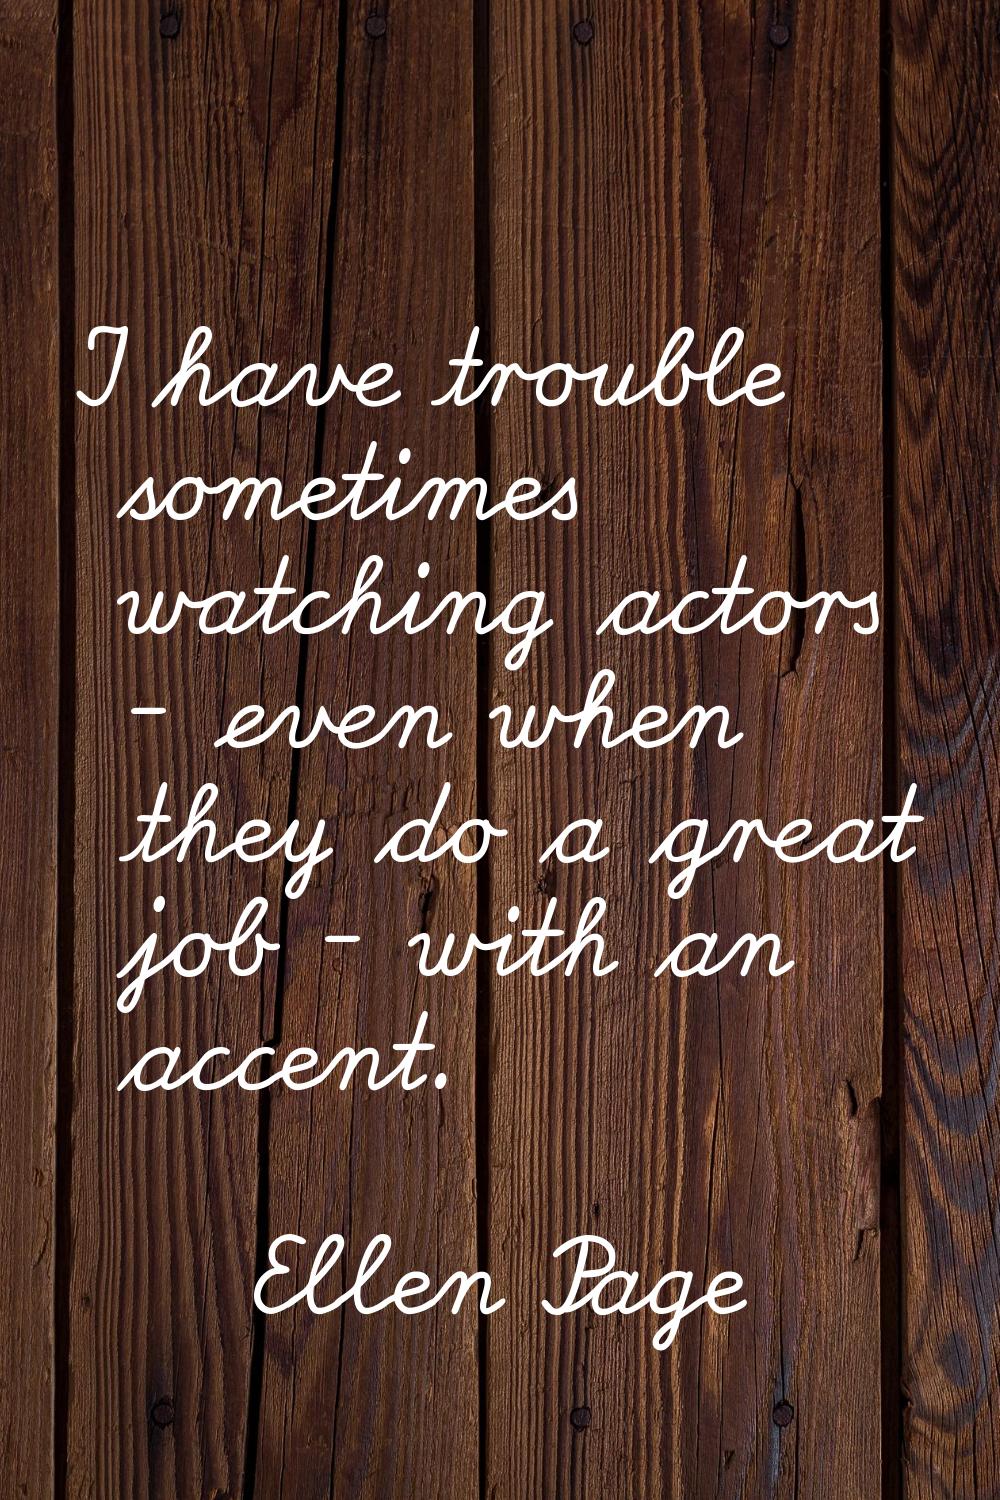 I have trouble sometimes watching actors - even when they do a great job - with an accent.